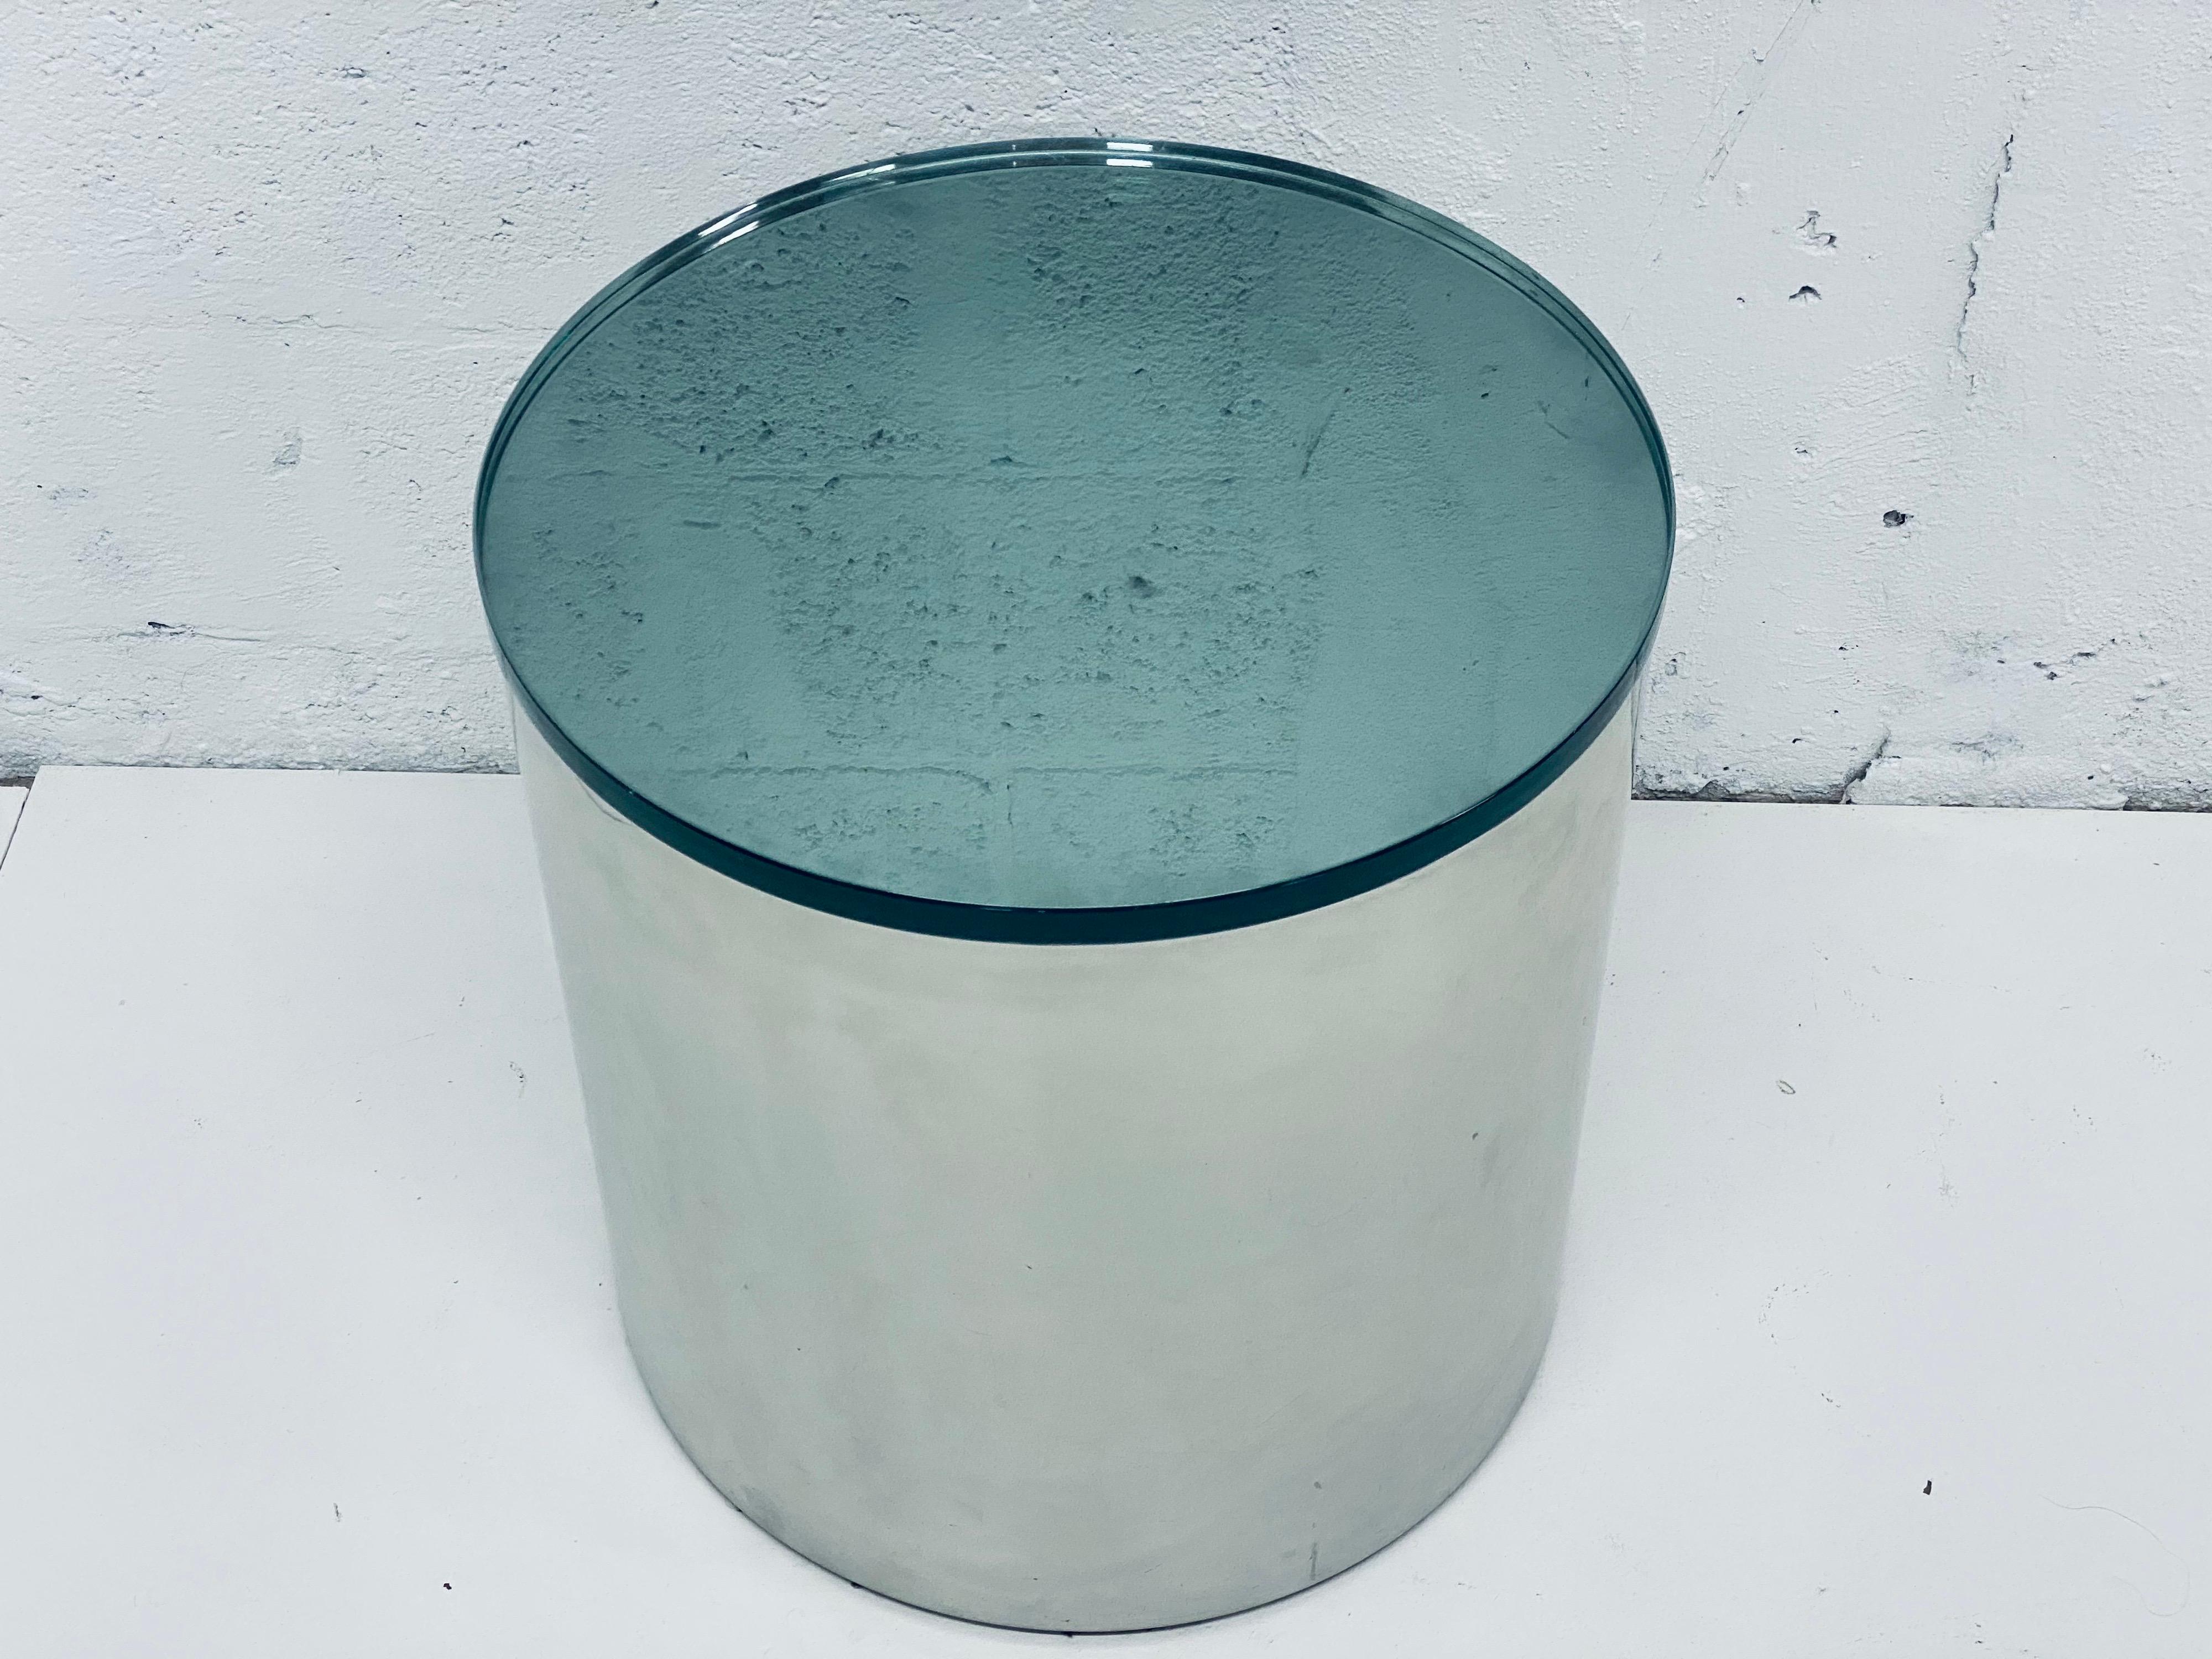 Paul Mayen Polished Steel and Glass Side Table for Habitat, 1970s For Sale 6